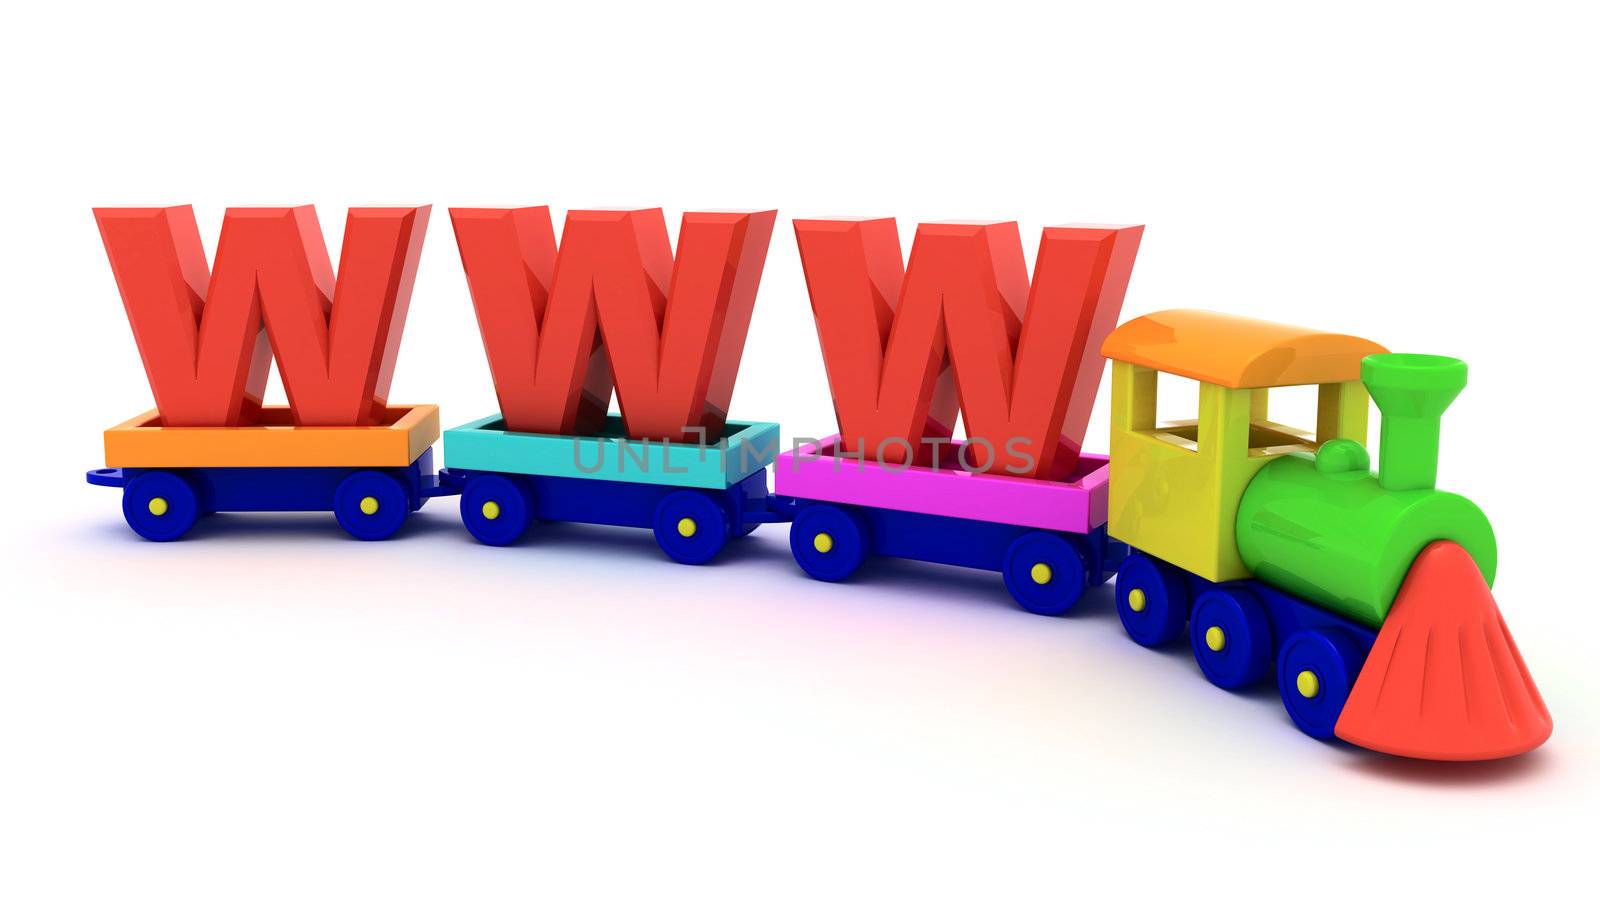 Red letters WWW on the toy train